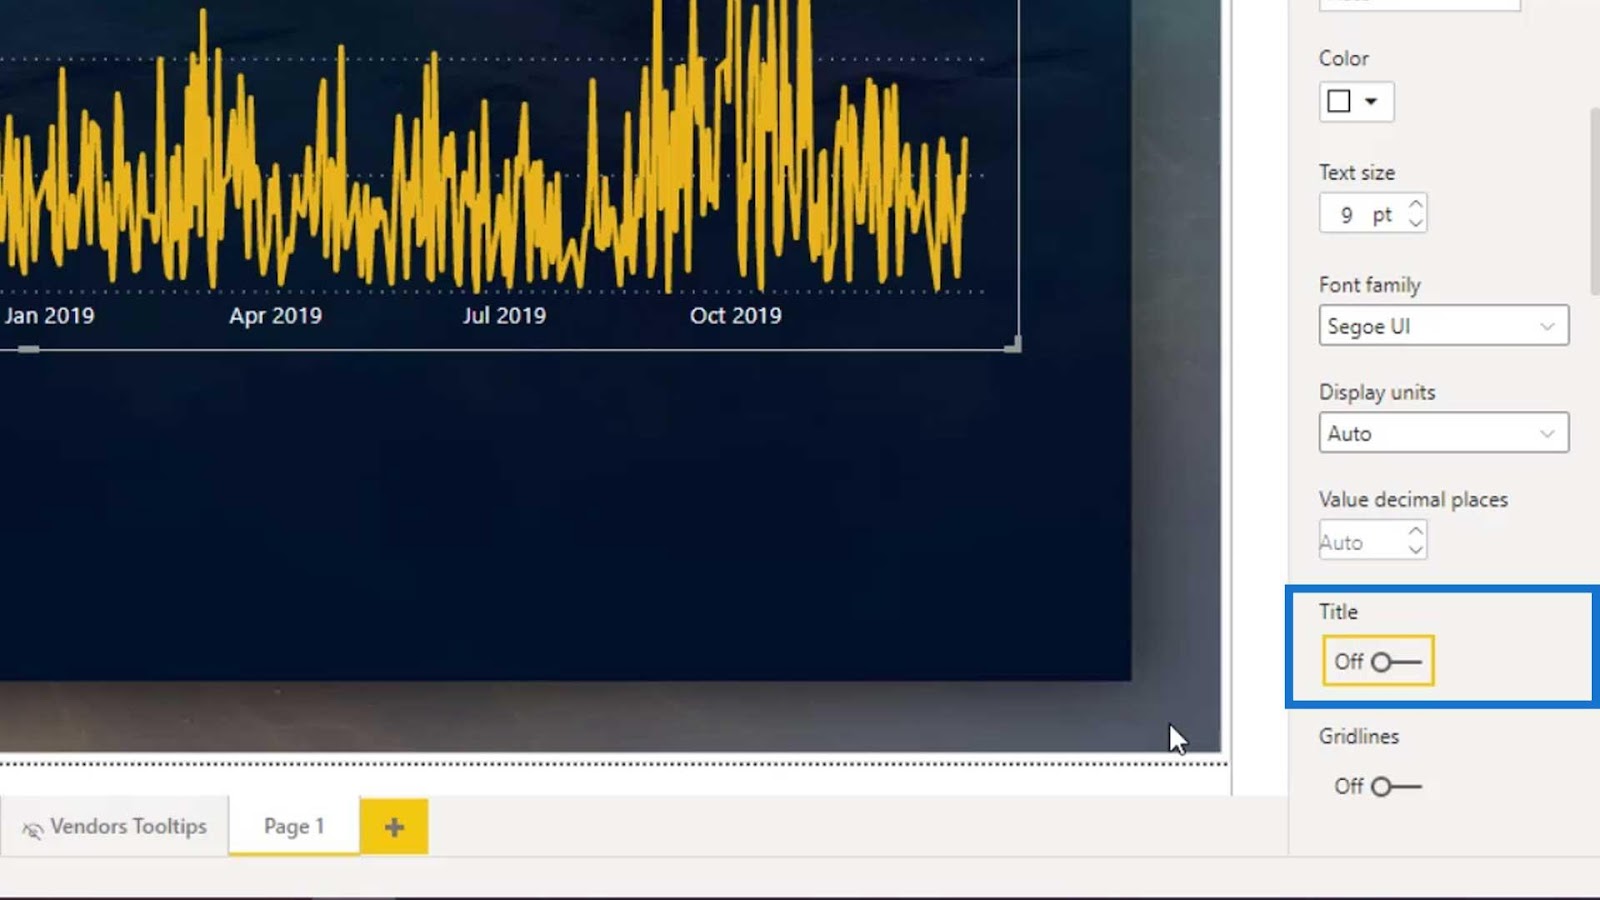 Anomaly Detection in Power BI